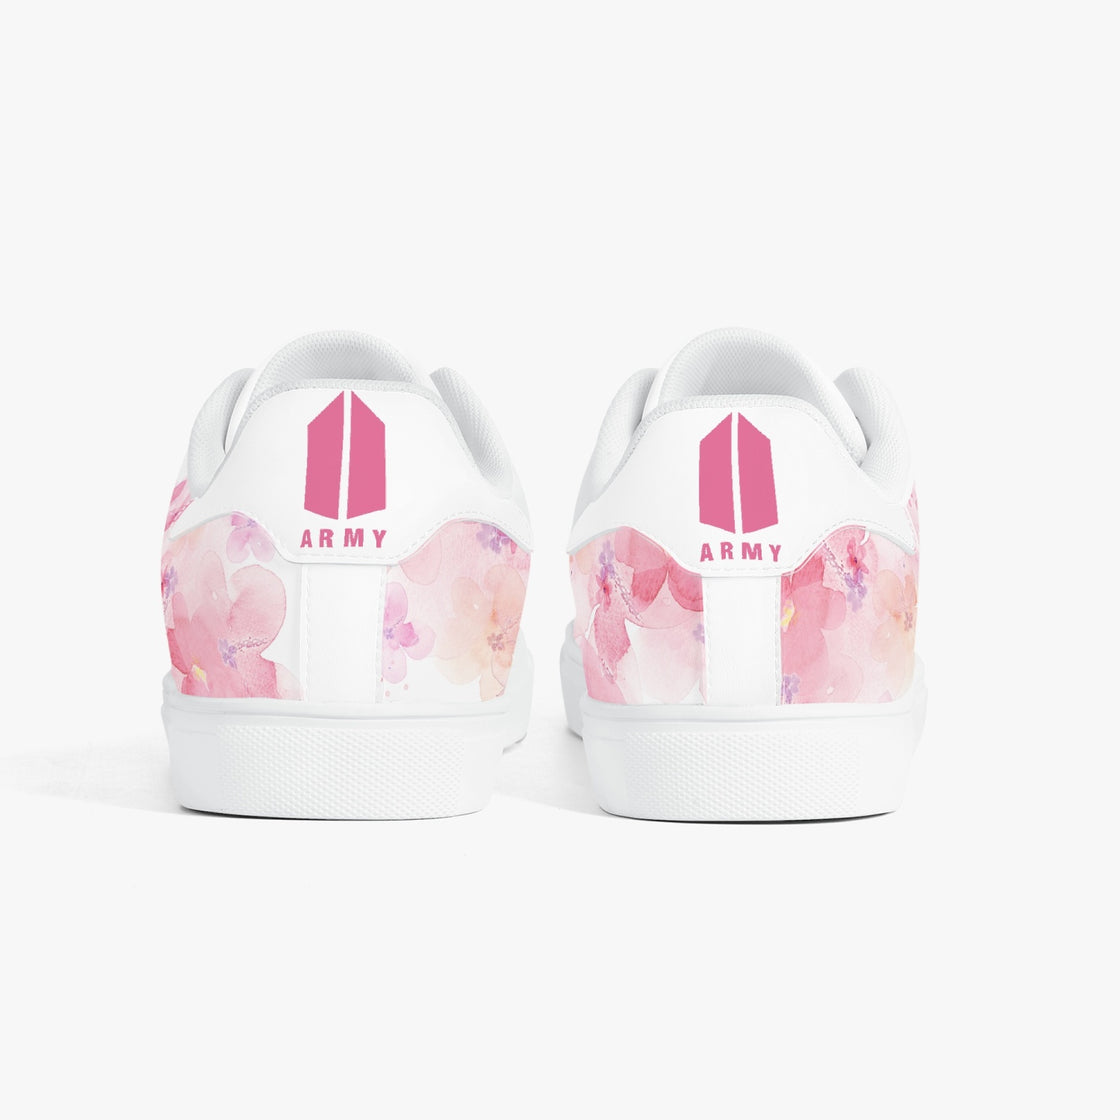 Classic Floral Design BTS ARMY Sneaker Shoes